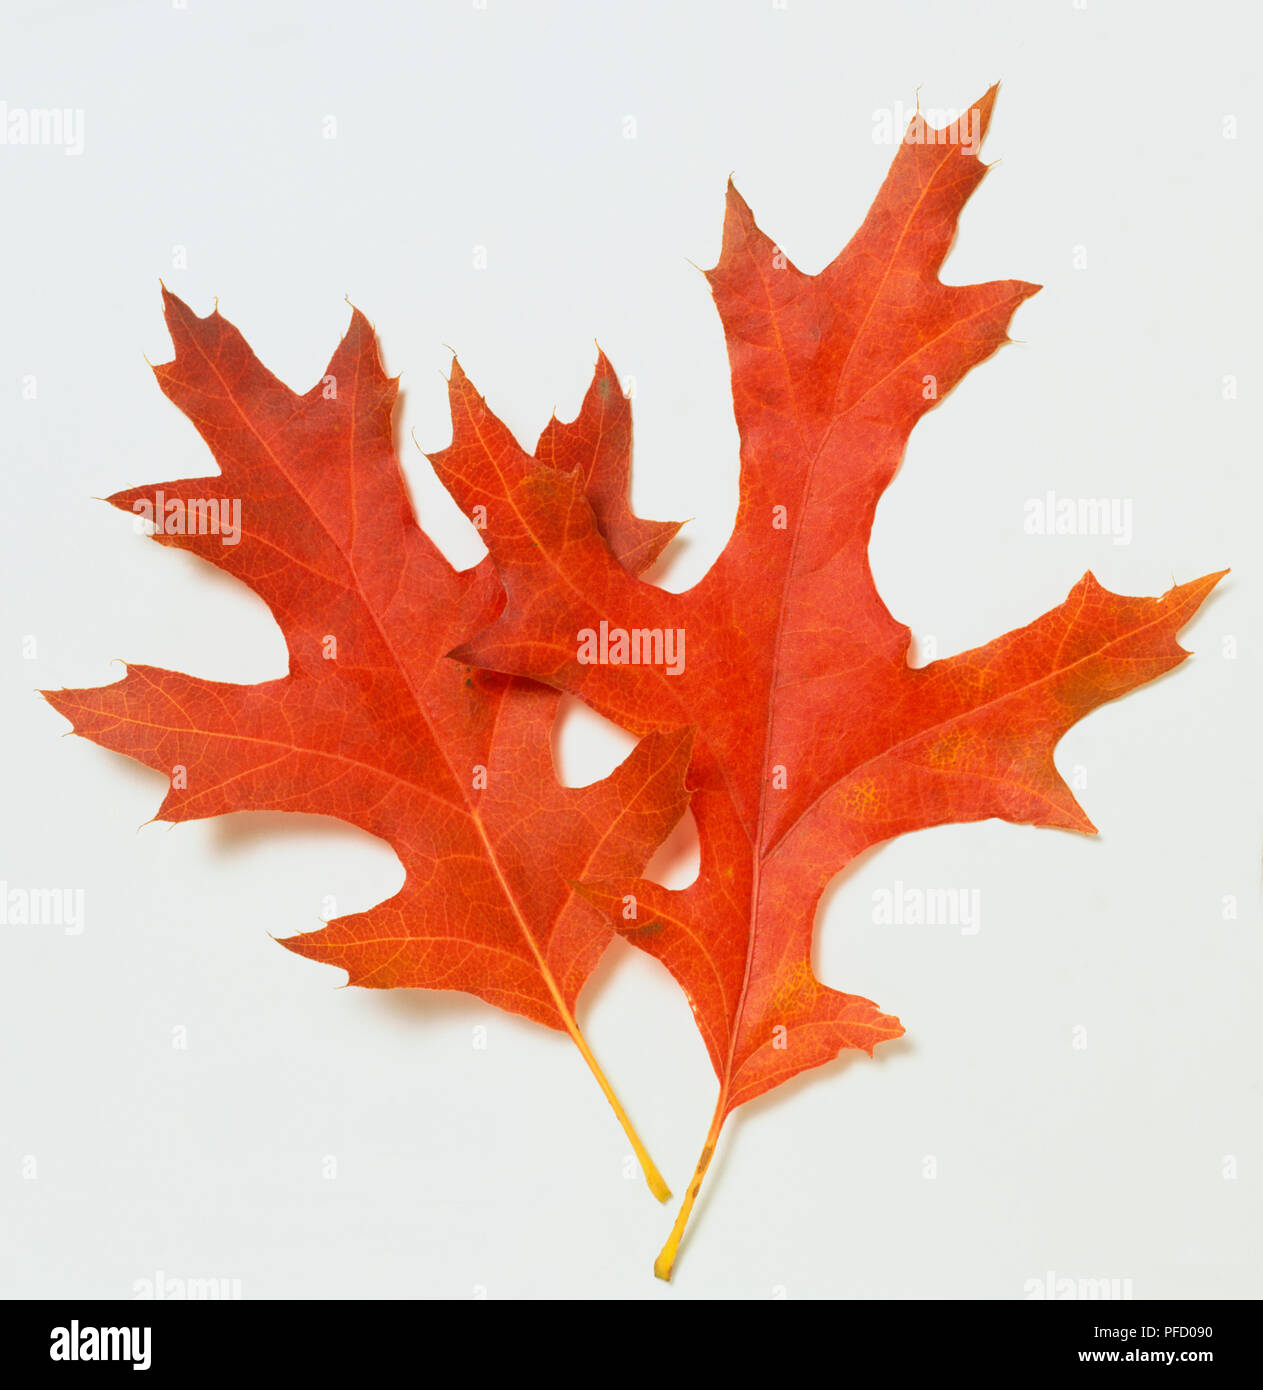 Quercus coccinea 'Splendens', Scarlet Oak, two red autumn leaves, close up. Stock Photo